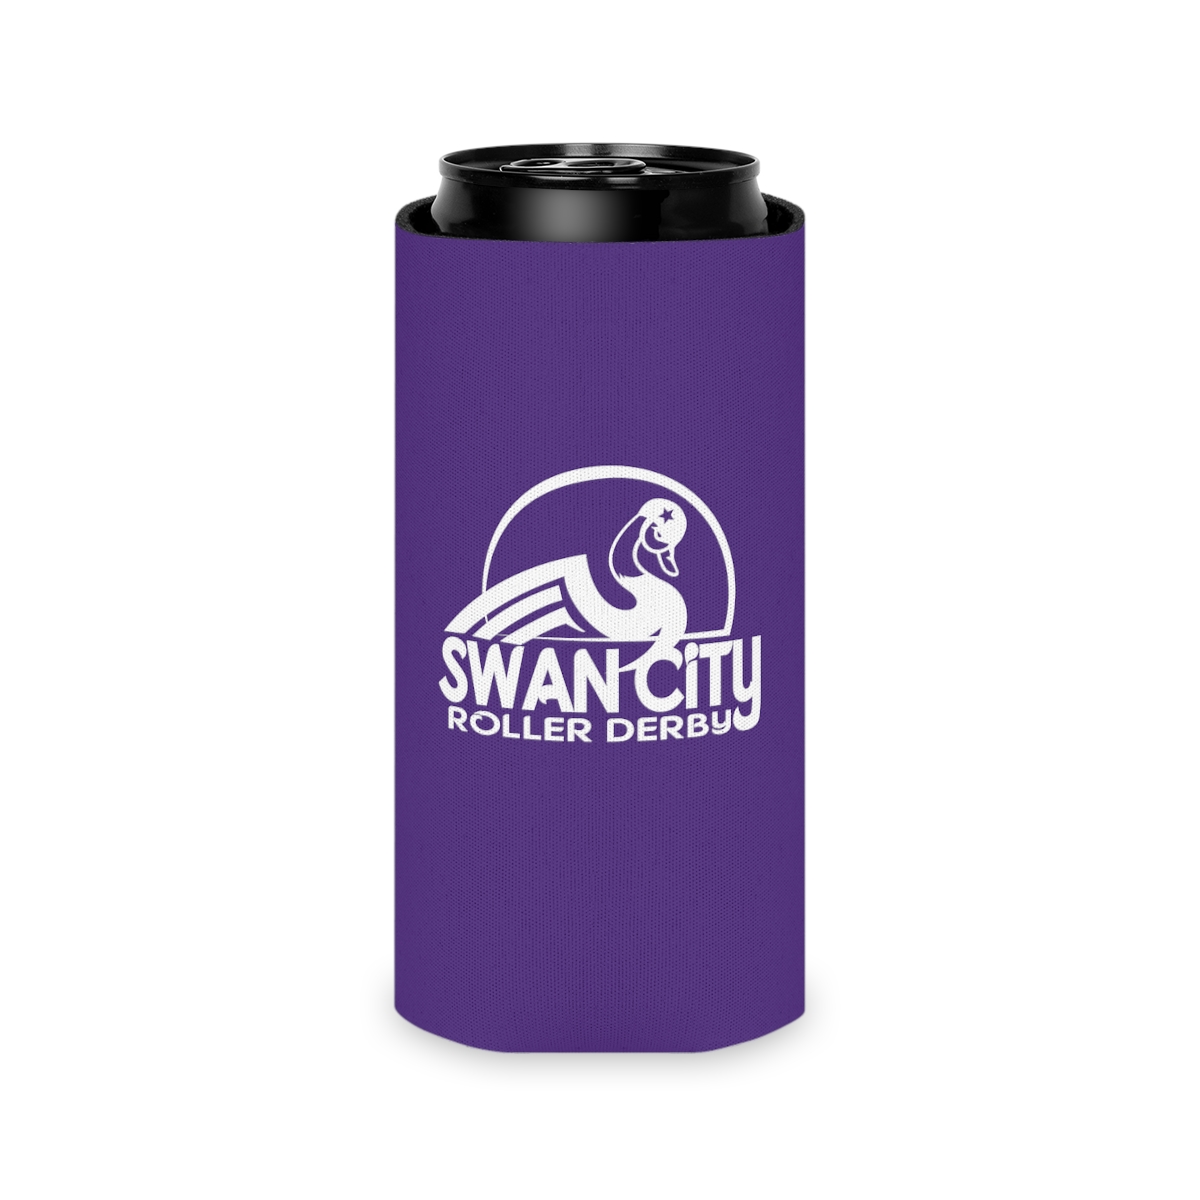 Swan City Roller Derby Coozie product thumbnail image